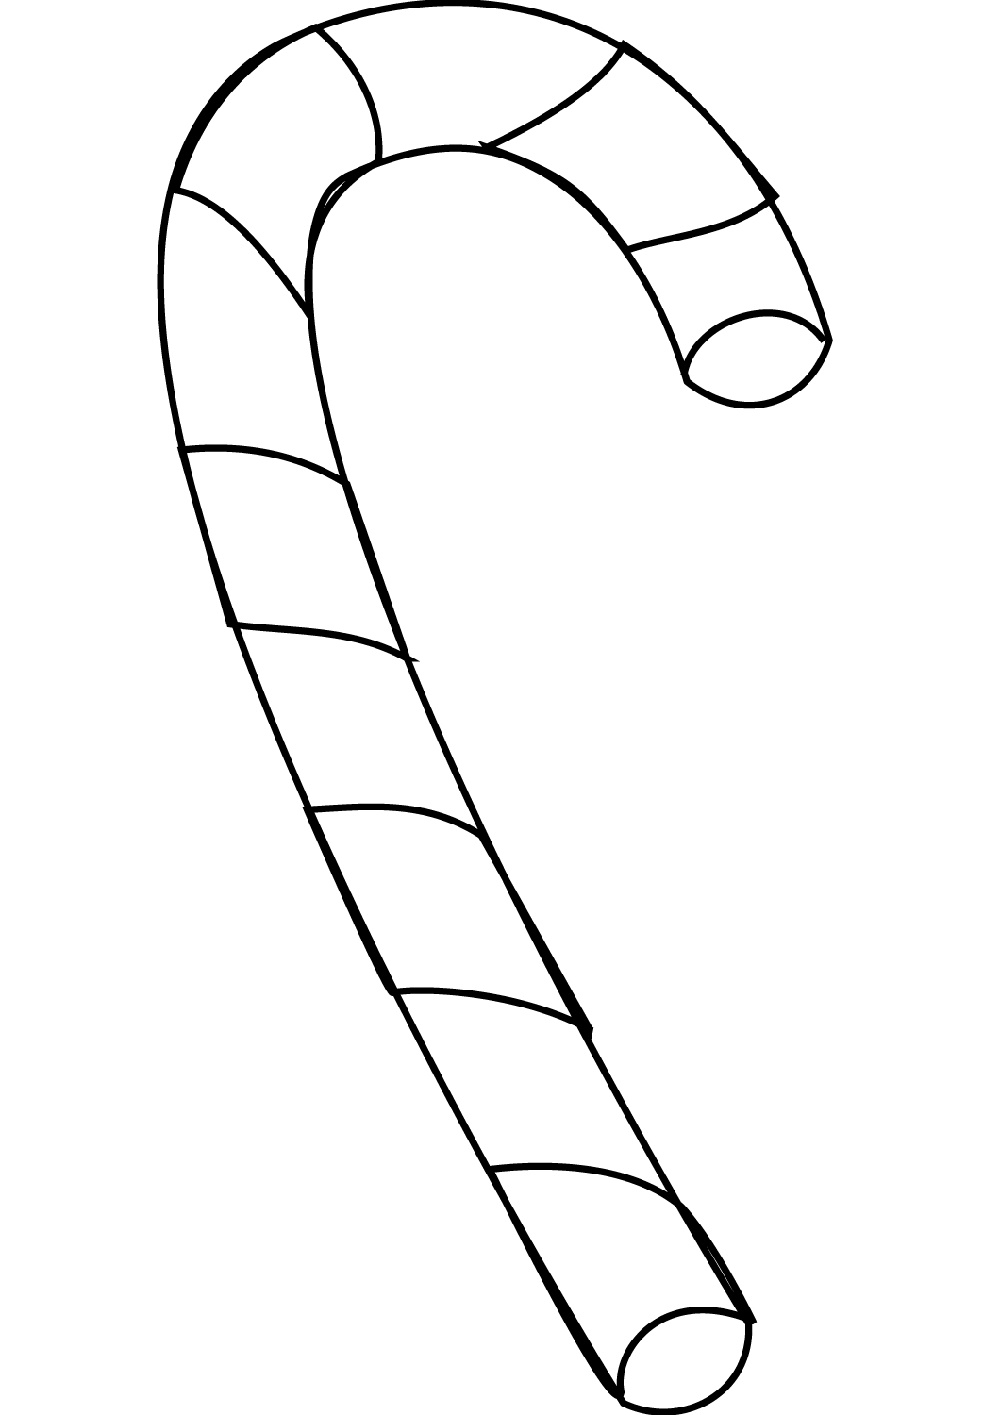 Candy Cane Coloring Page All Students K5 Worksheets